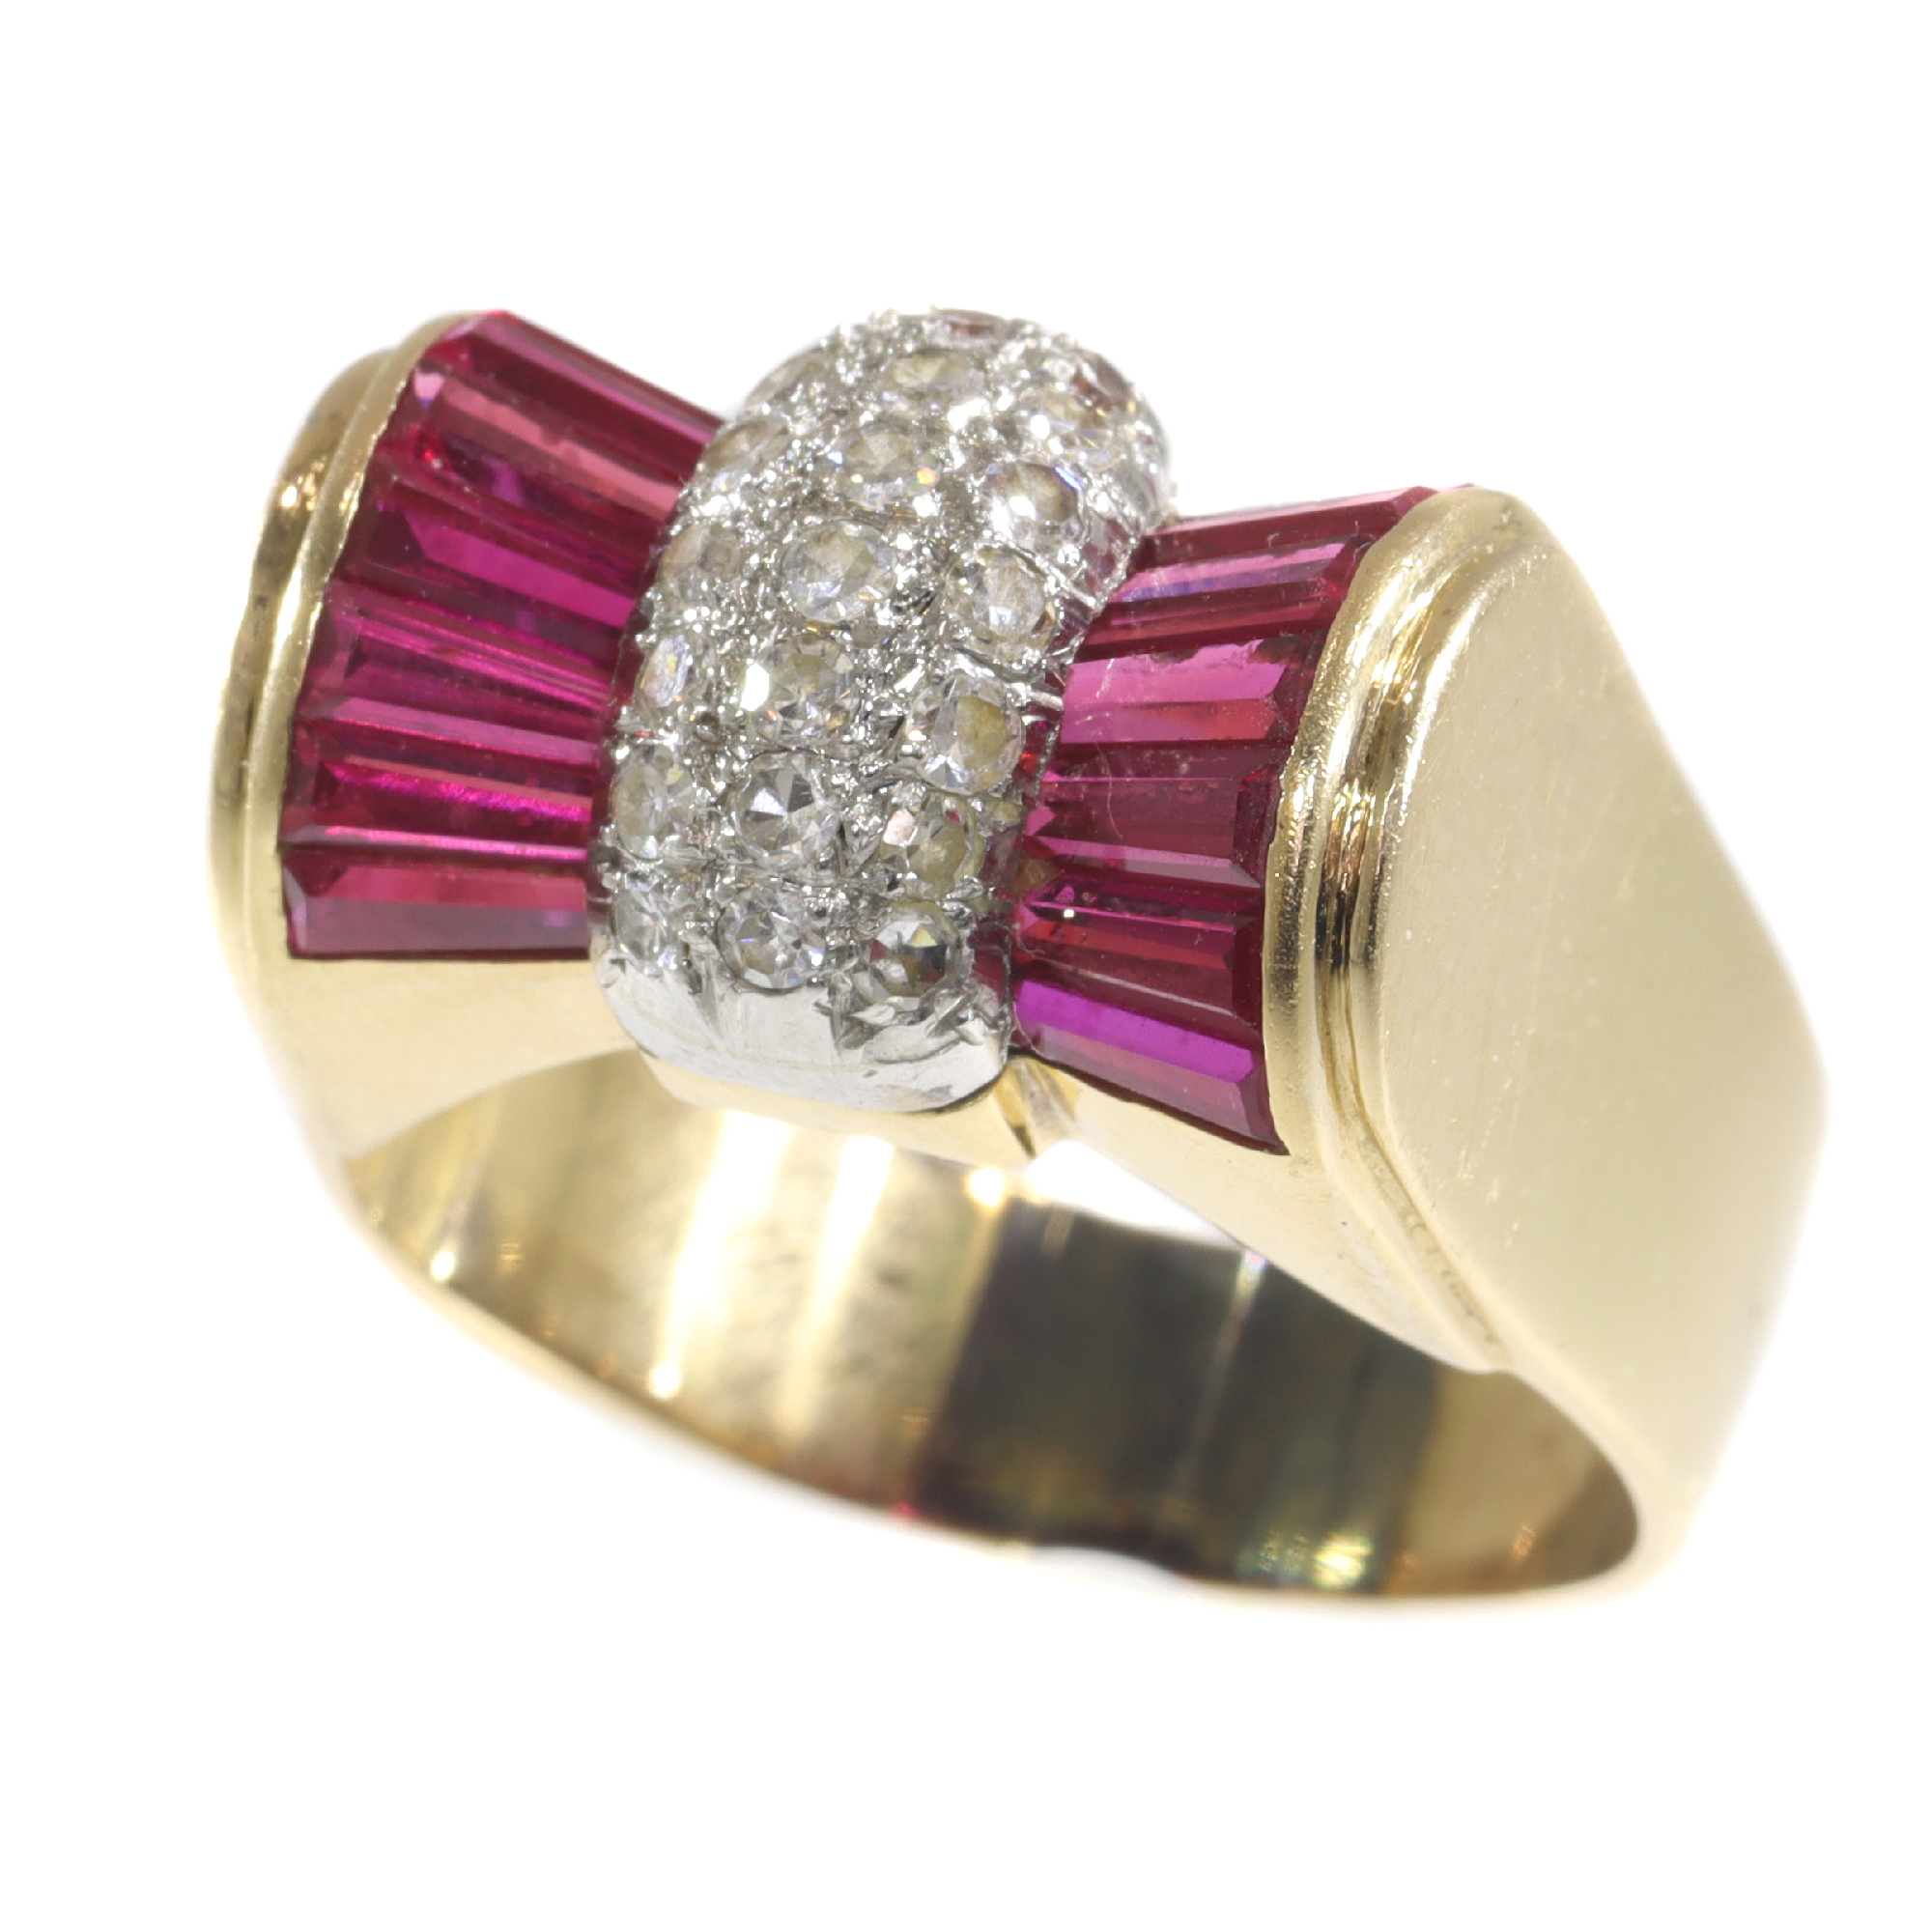 Strong design vintage Retro bow tie ring with rubies and diamonds